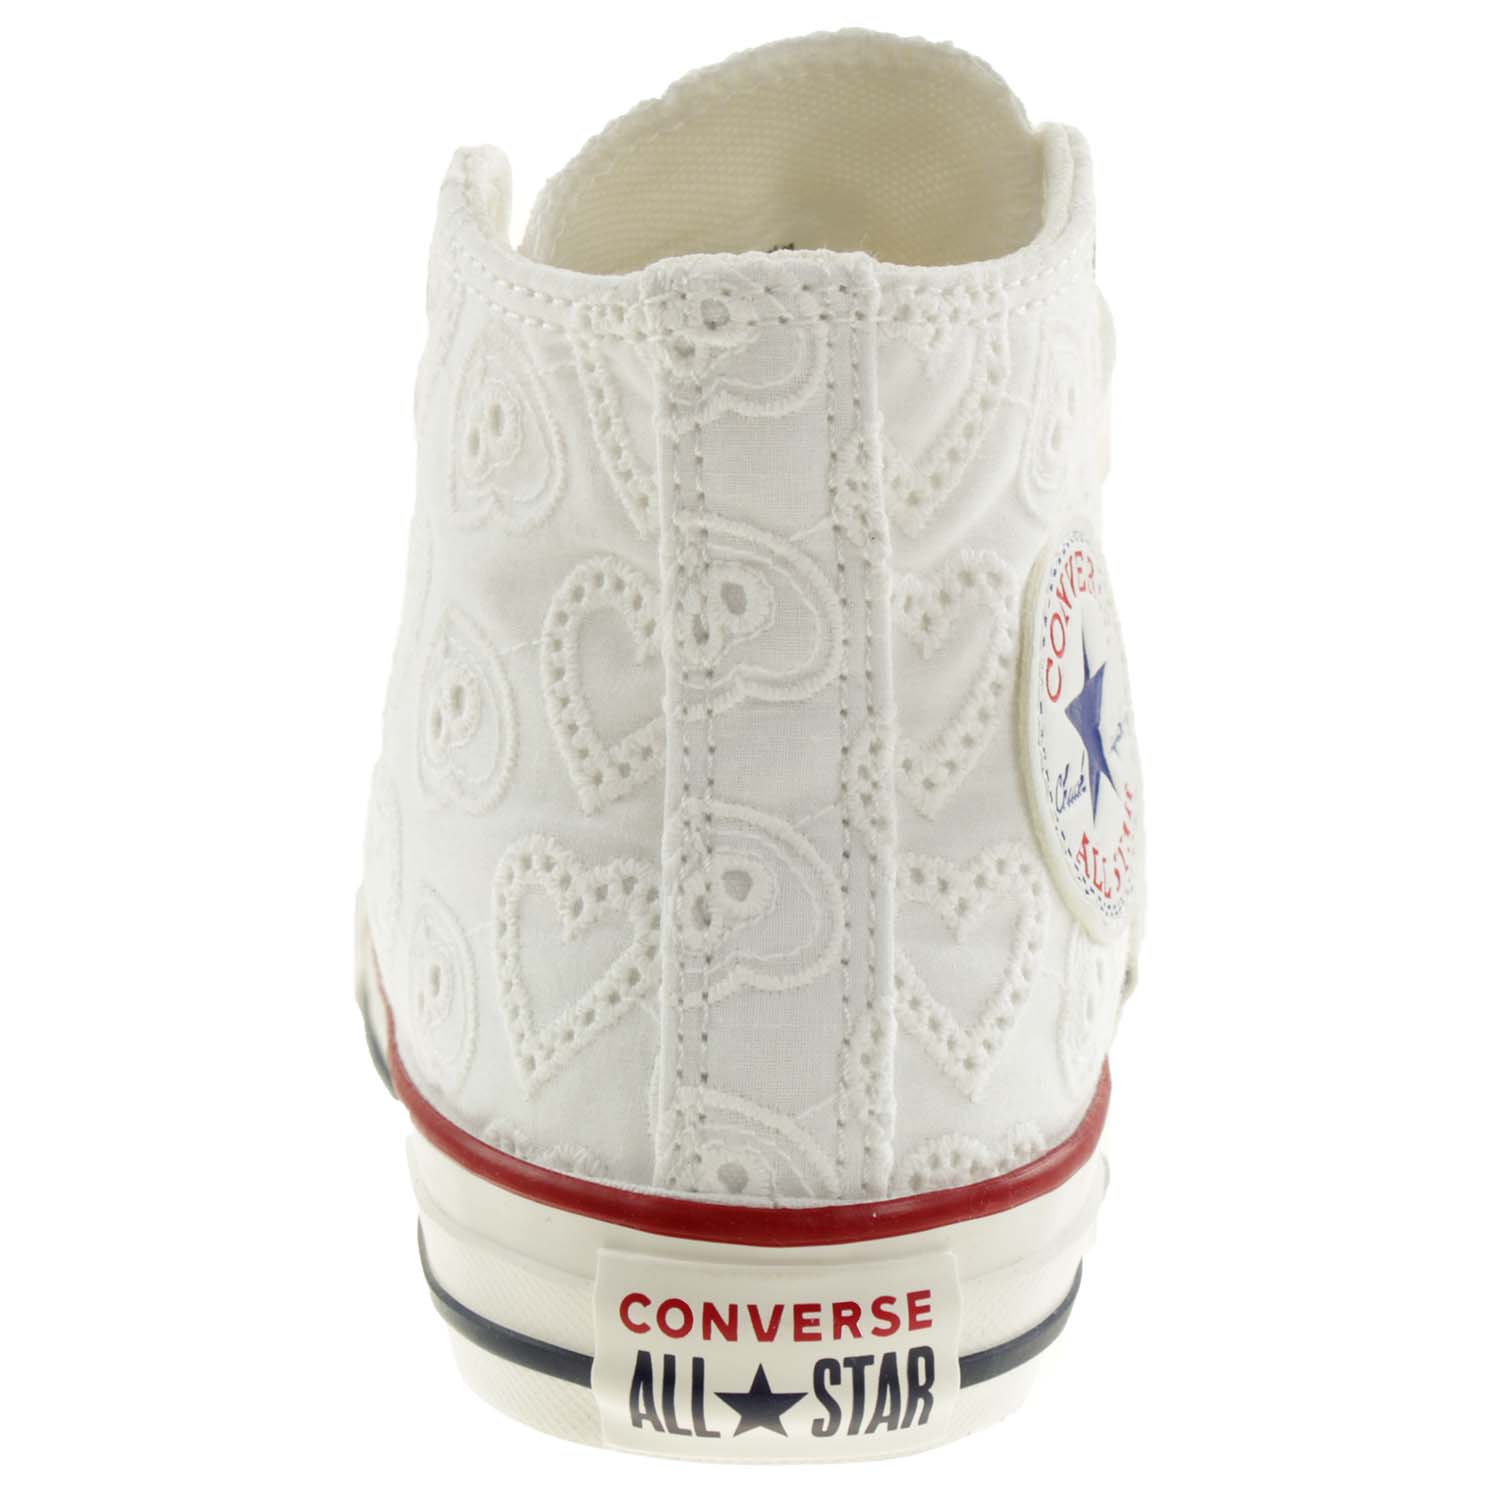 Converse Kinder Love Ceremony Chuck Taylor All Star High-Top Sneaker 671097 weiss